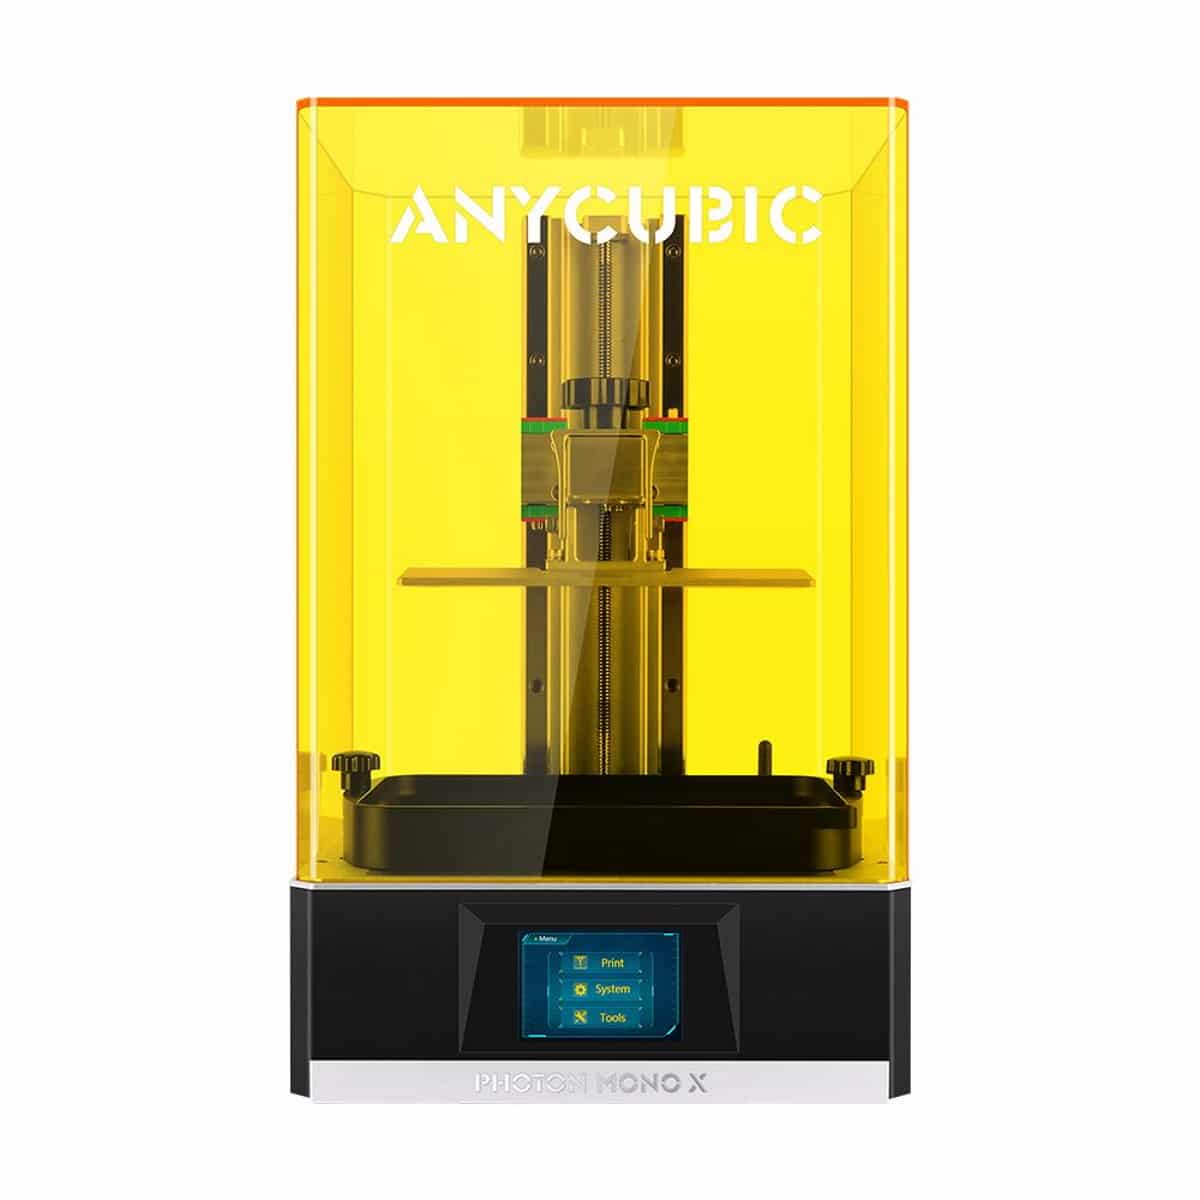 Billede af Anycubic Photon Mono X